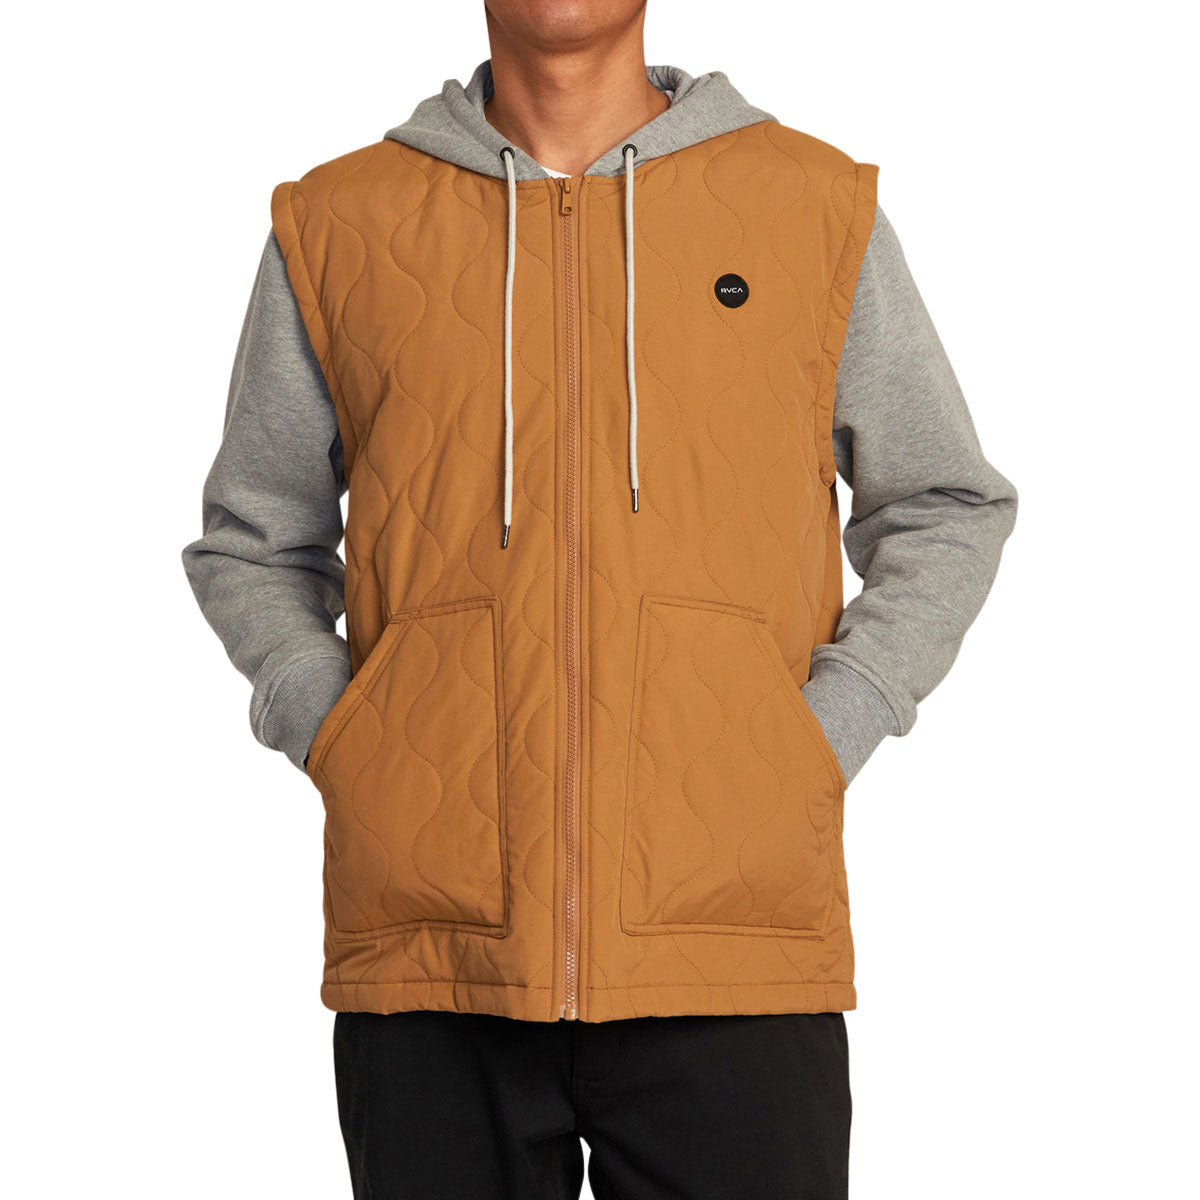 RVCA Grant Puffer Jacket - Camel image 1